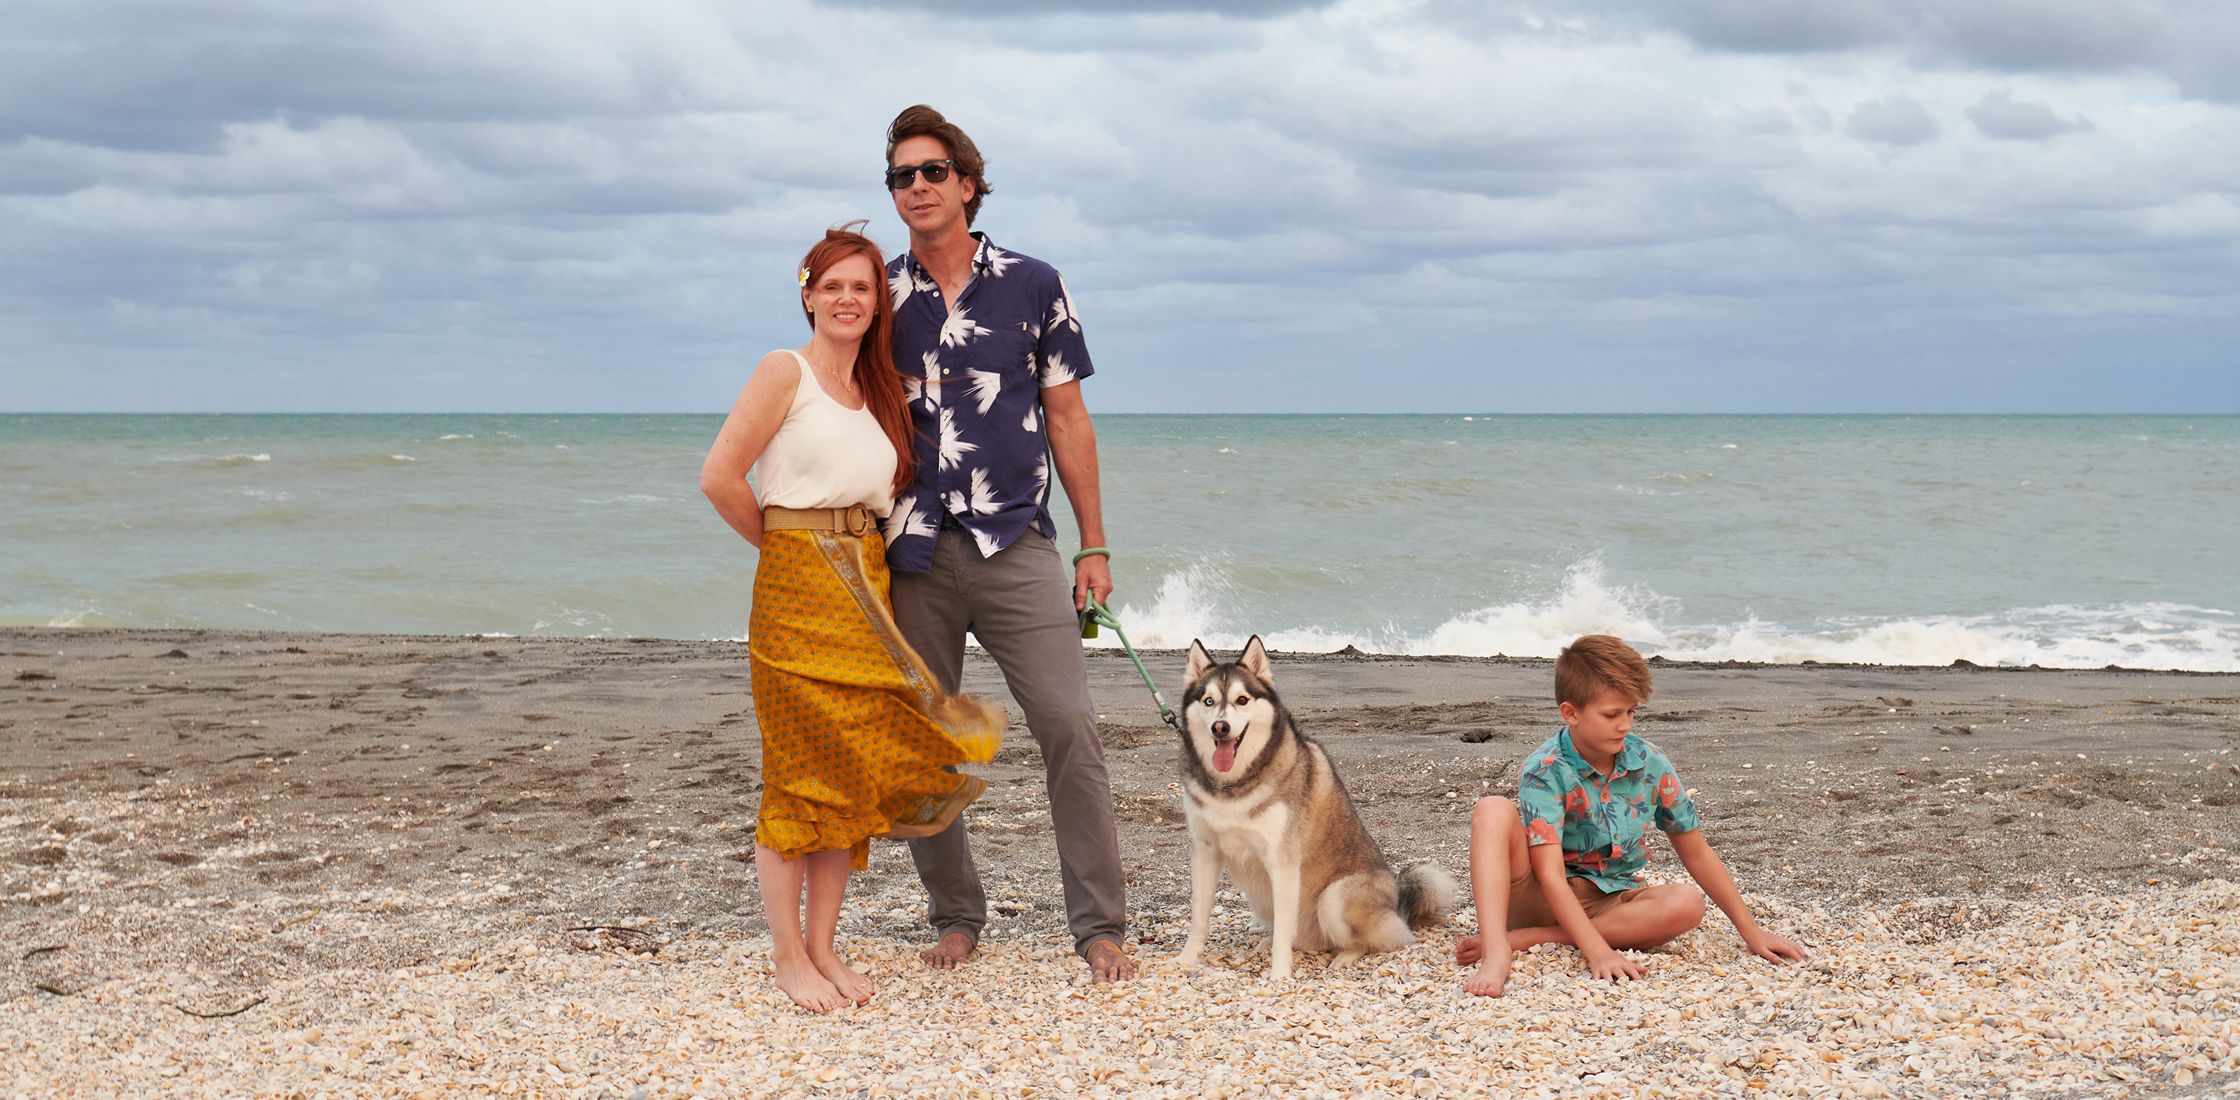 Gavin Rumbaugh stands on a beach with his family: his wife, dog and child.